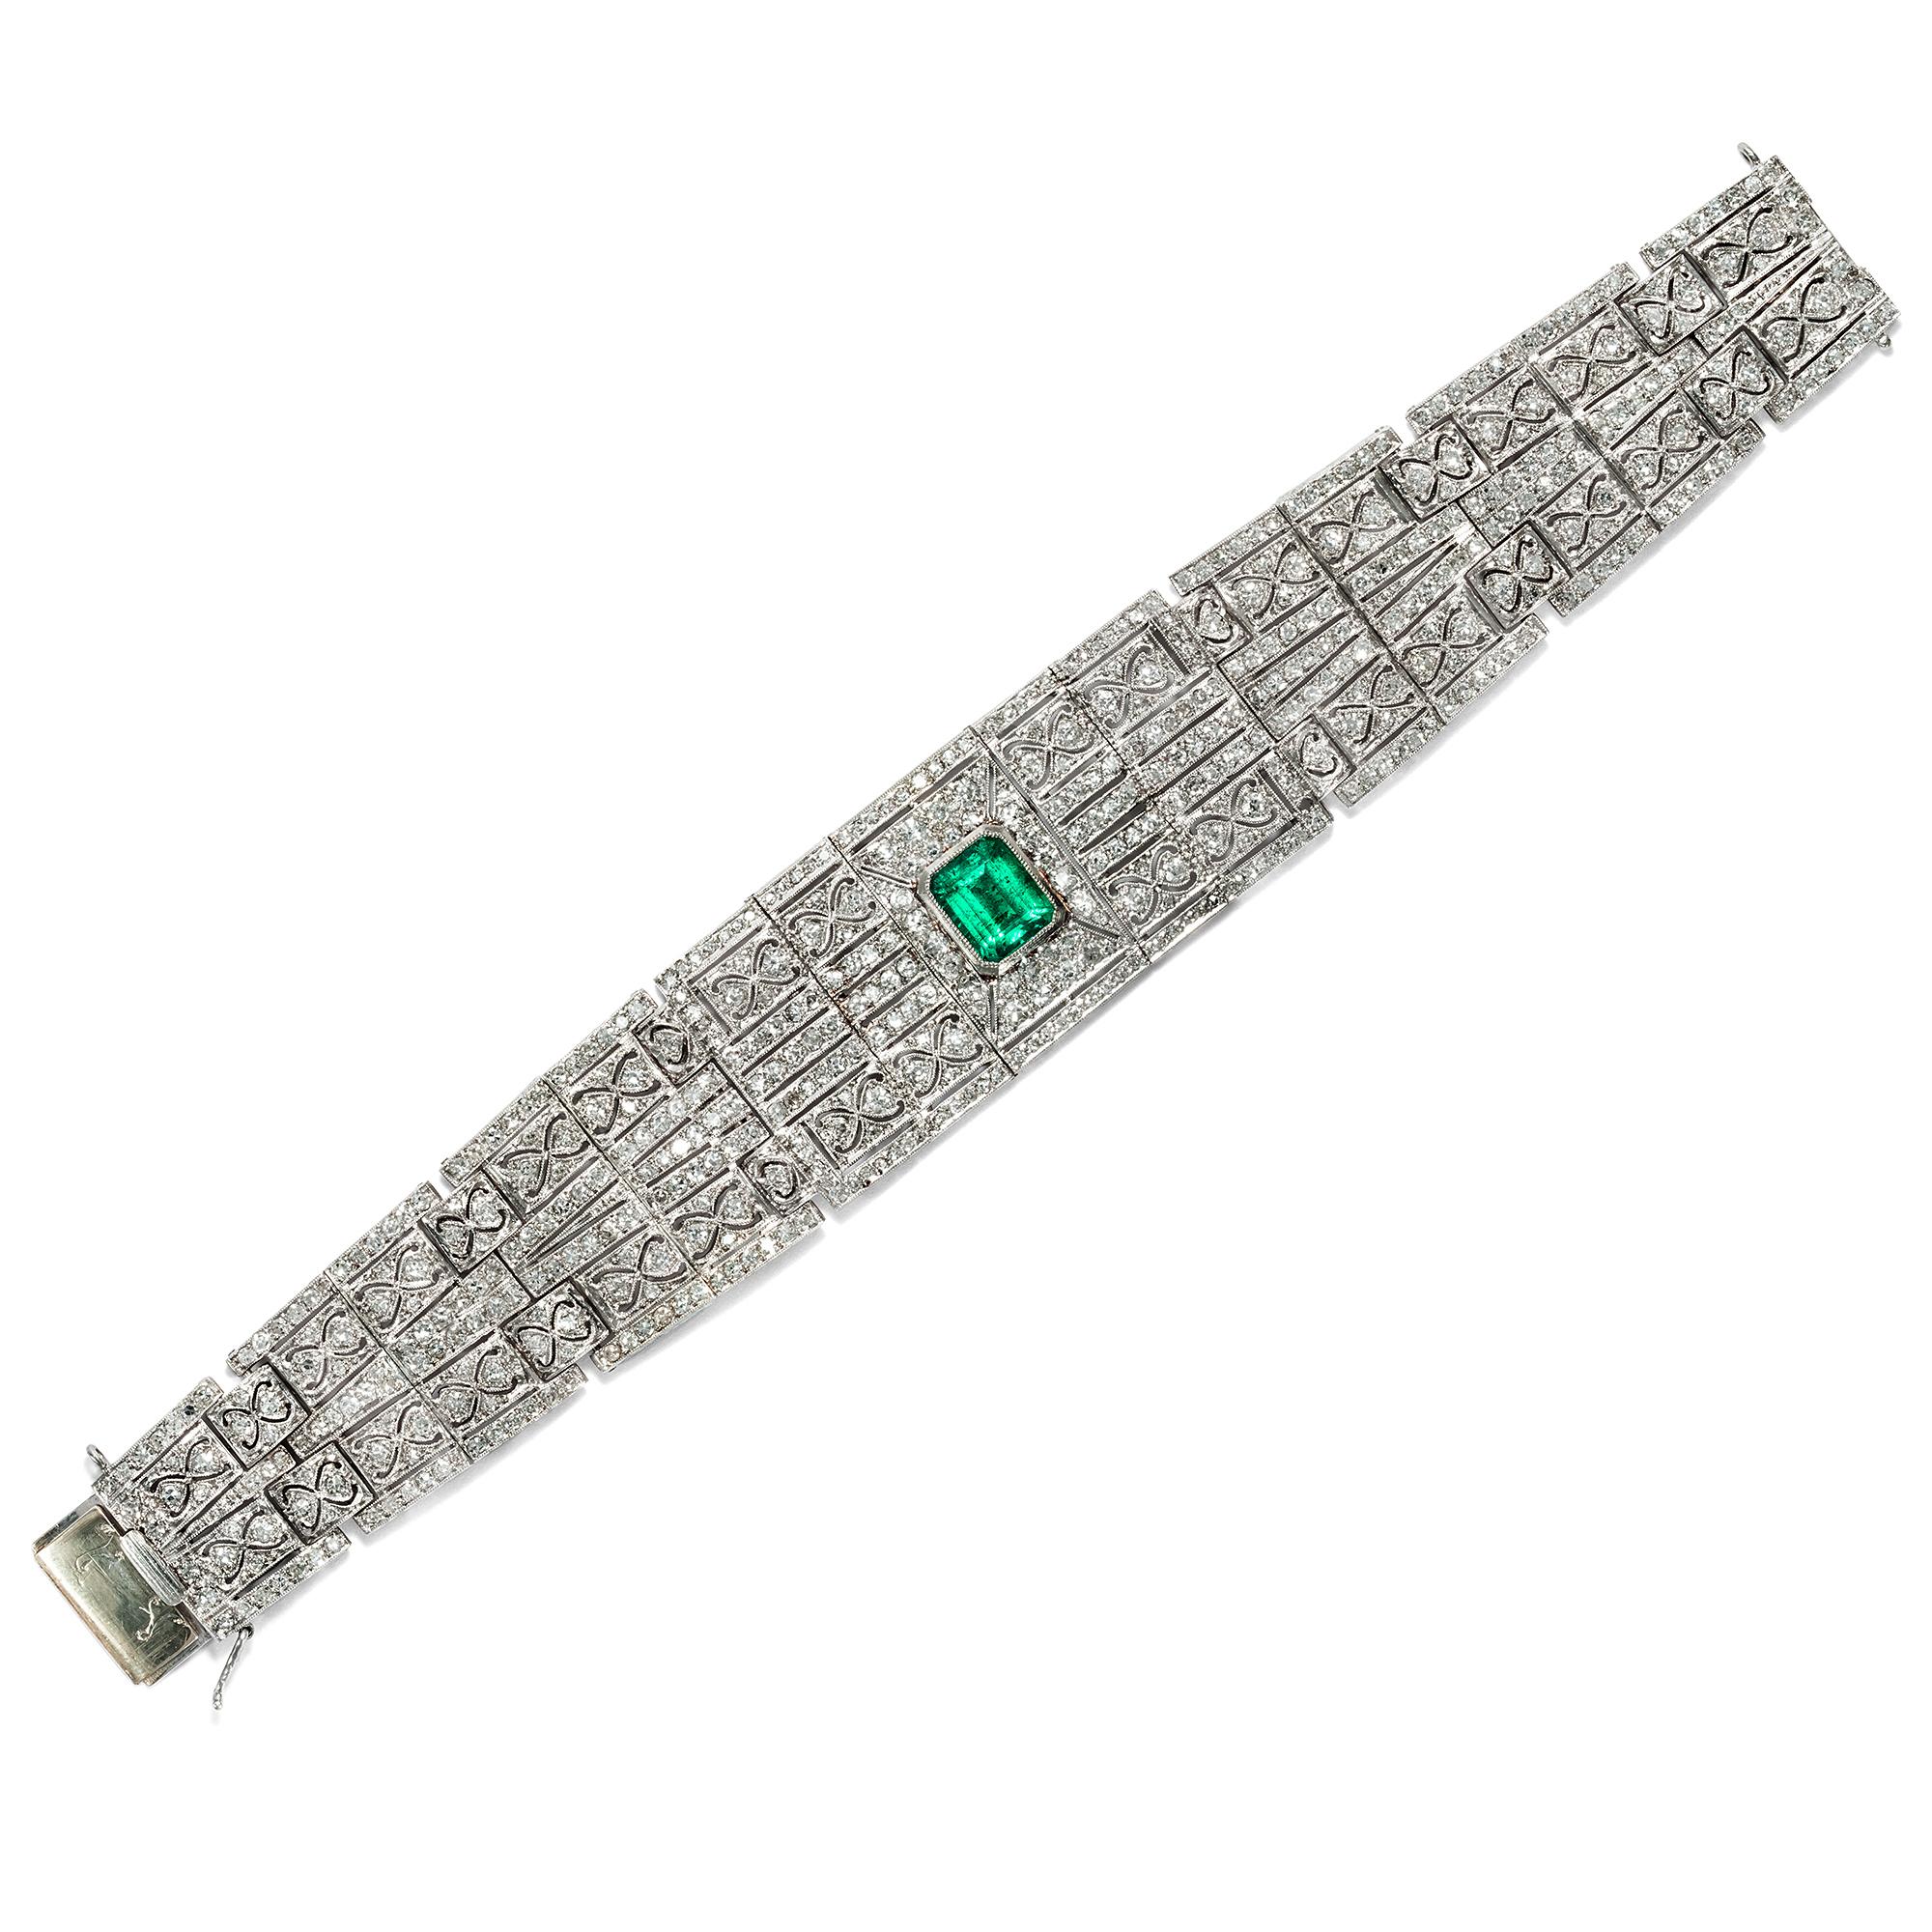 Jewellery of the first decades of the 20th century is characterised by its unsurpassed perfection of craftsmanship, with an eye on luxurious details at all times. This Art Déco bracelet, dating to the mid-1920s, is a perfect example; each of its